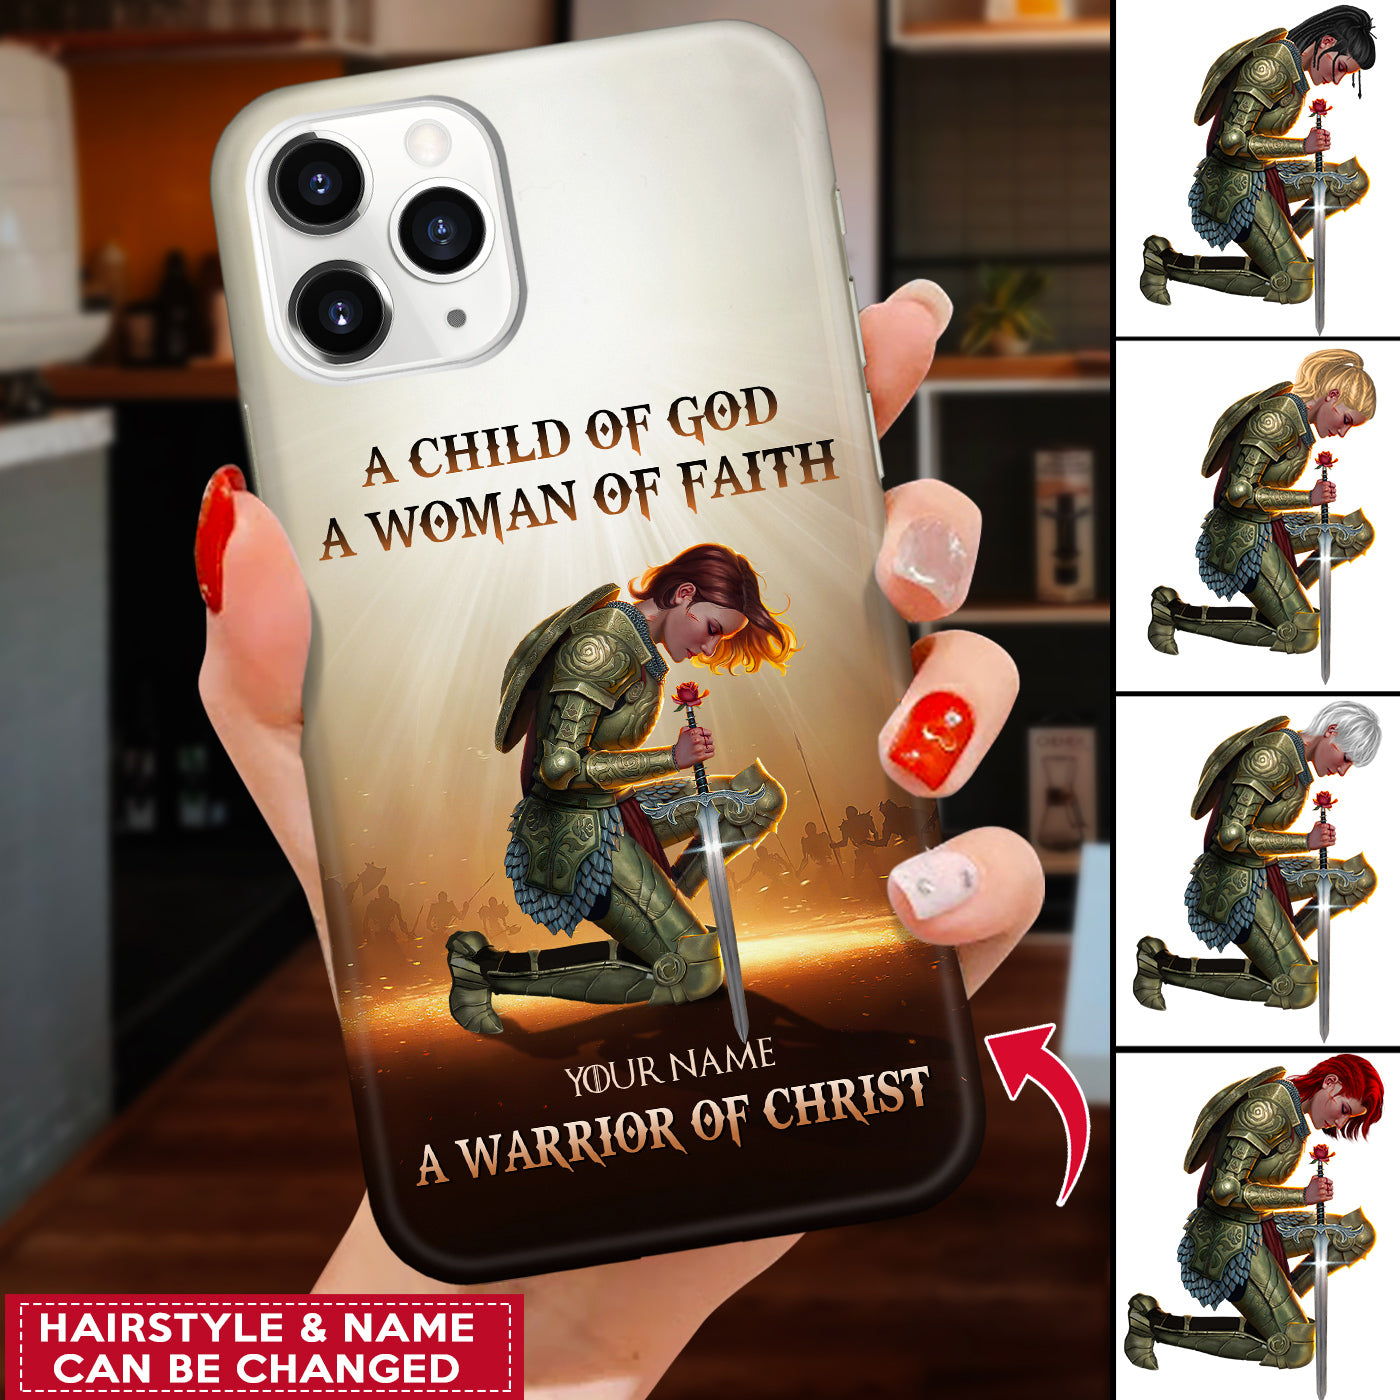 A Child of God A Woman of Faith A Warrior of Christ Personalized Phonecase